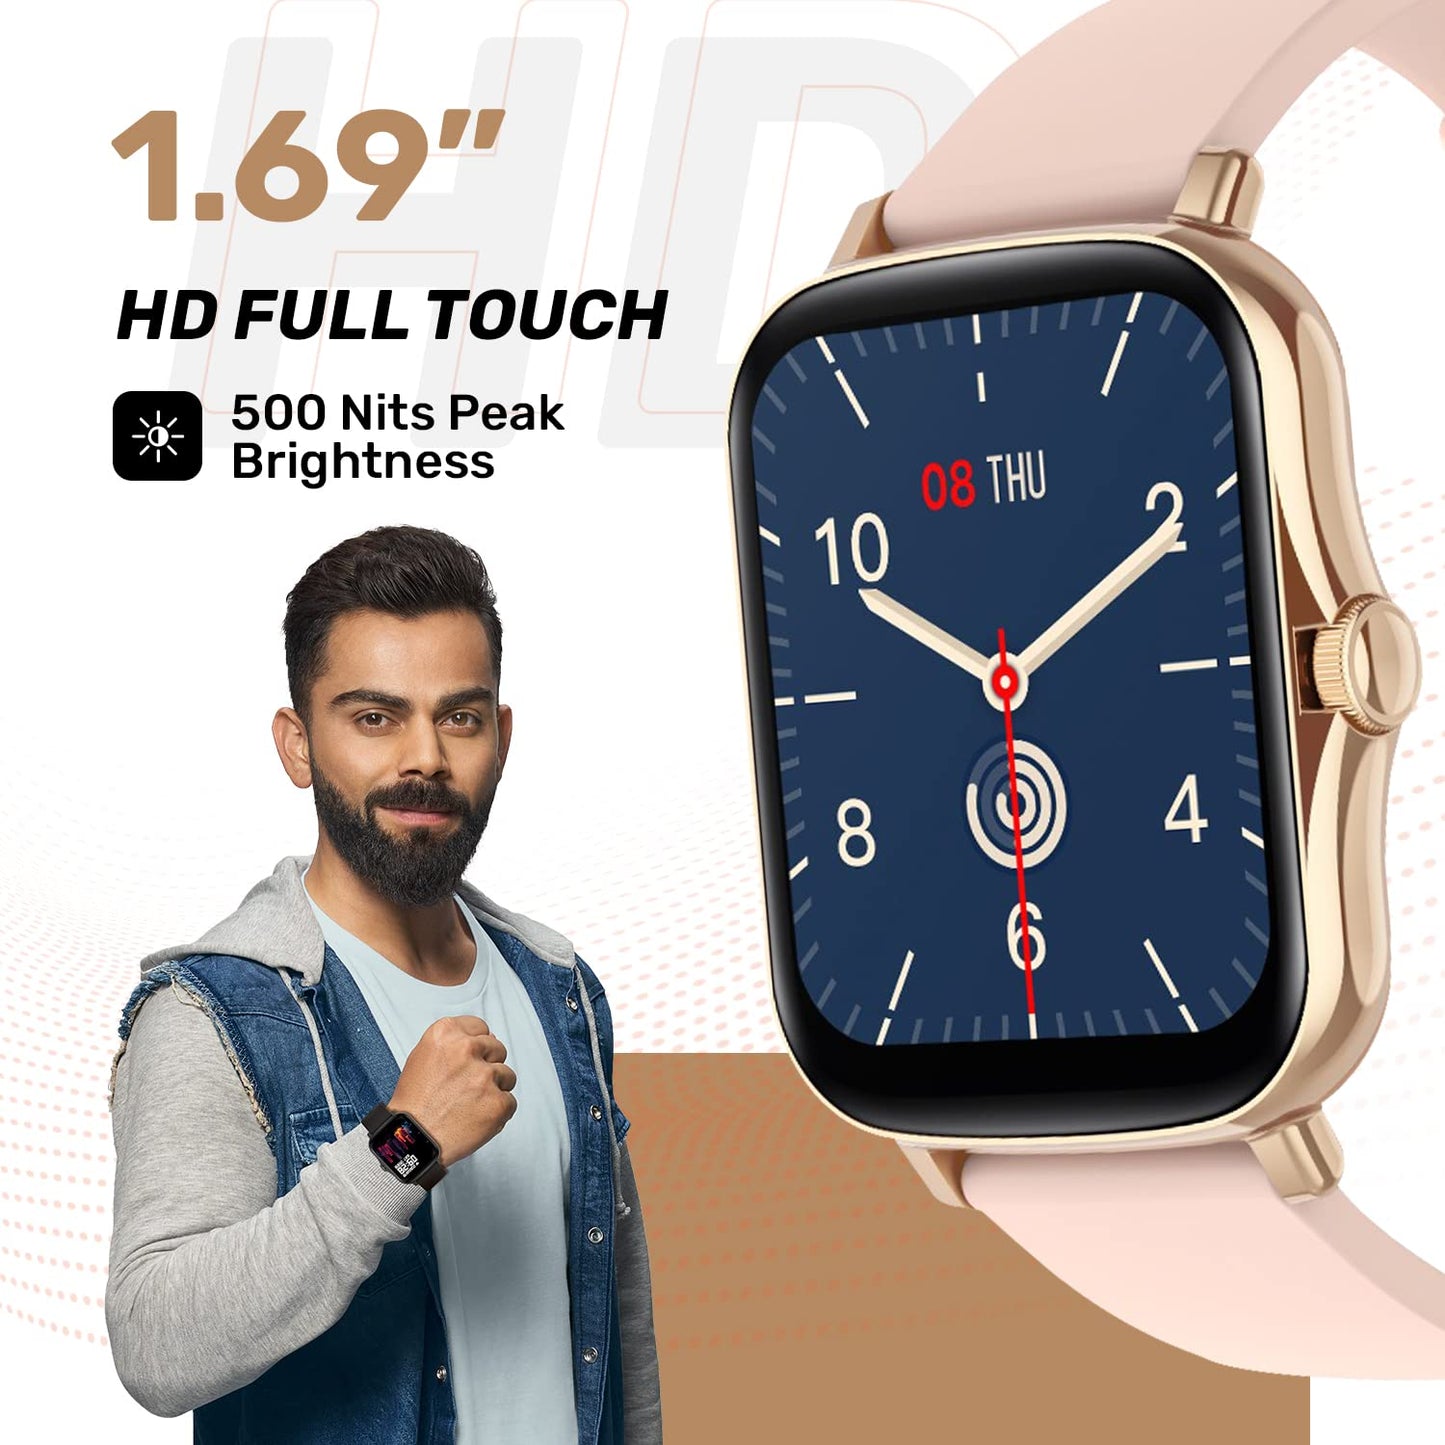 Fire-Boltt Beast SPO2 1.69" Full Touch Large HD Color Display Smart Watch, 8 Days Battery Life, IP67 Waterpoof with Heart Rate Monitor, Sleep & Breathe Monitoring with Rotating Button (Gold)